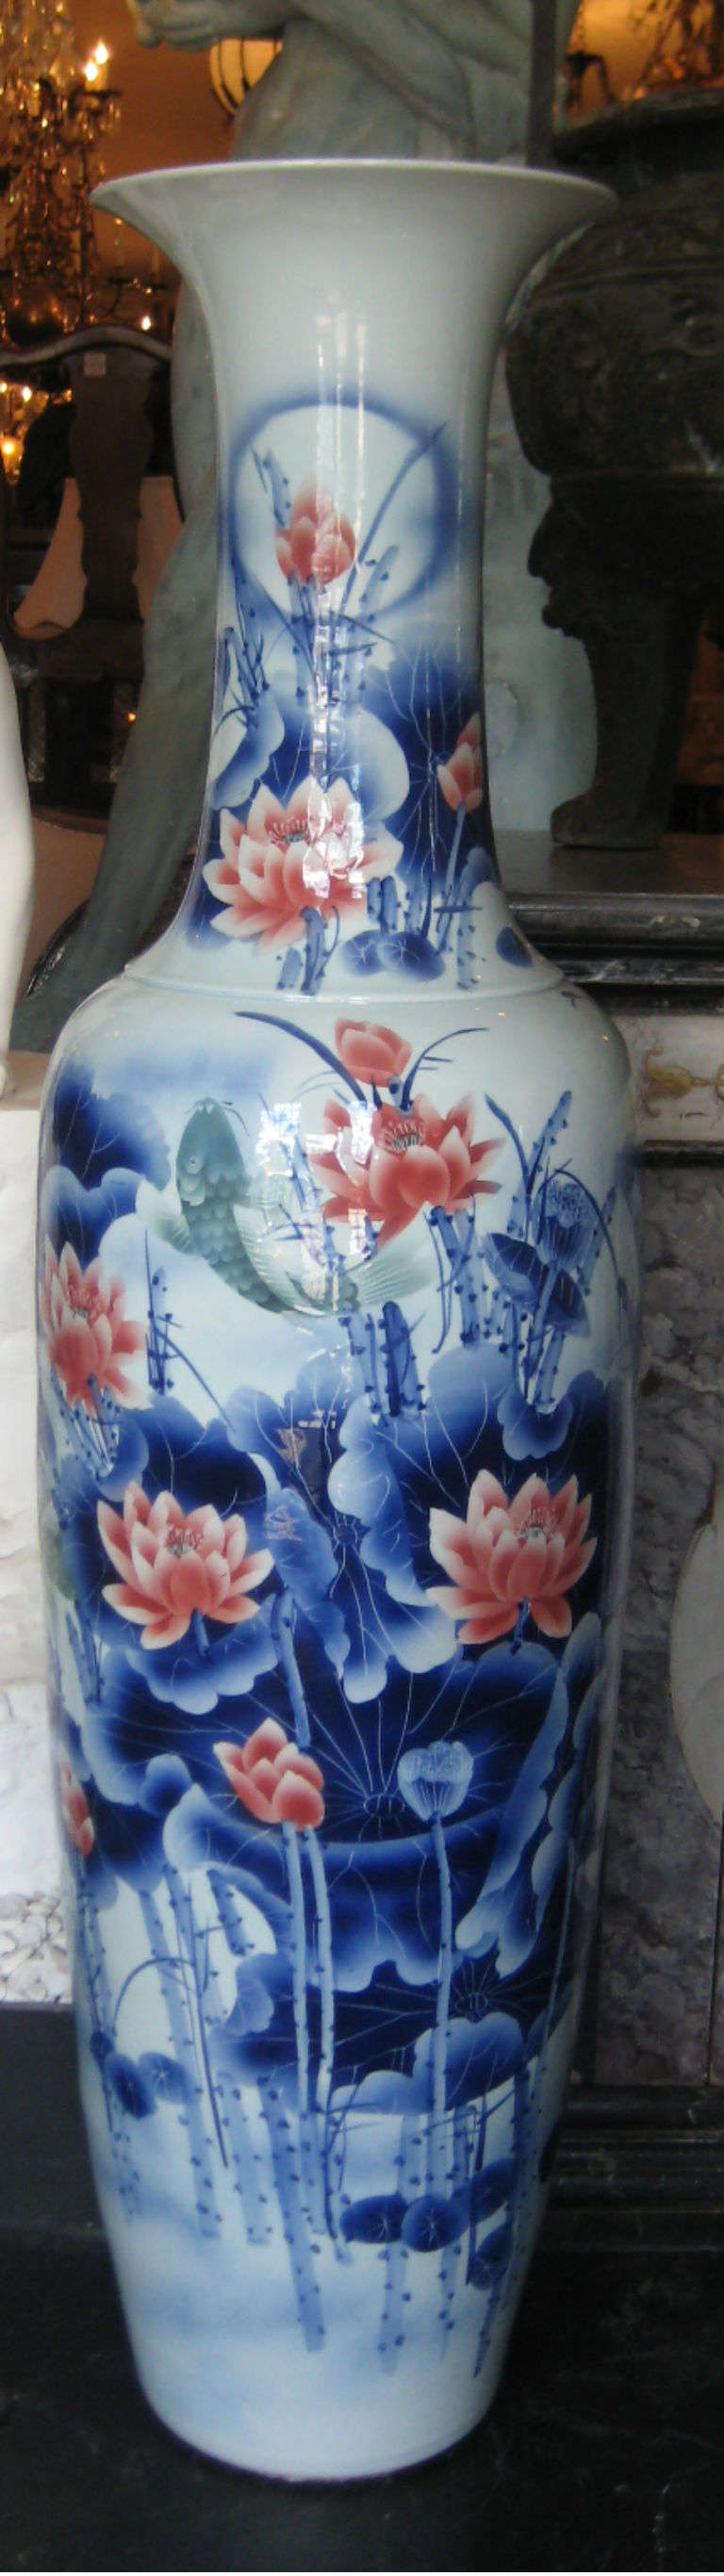 Large Chinese export porcelain palace vase, the front beautifully decorated with Lotus flowers, the reverse with Koi fish and calligraphy.

According to Feng Shui, a fish represents wealth and prosperity because the actual word in Chinese for fish